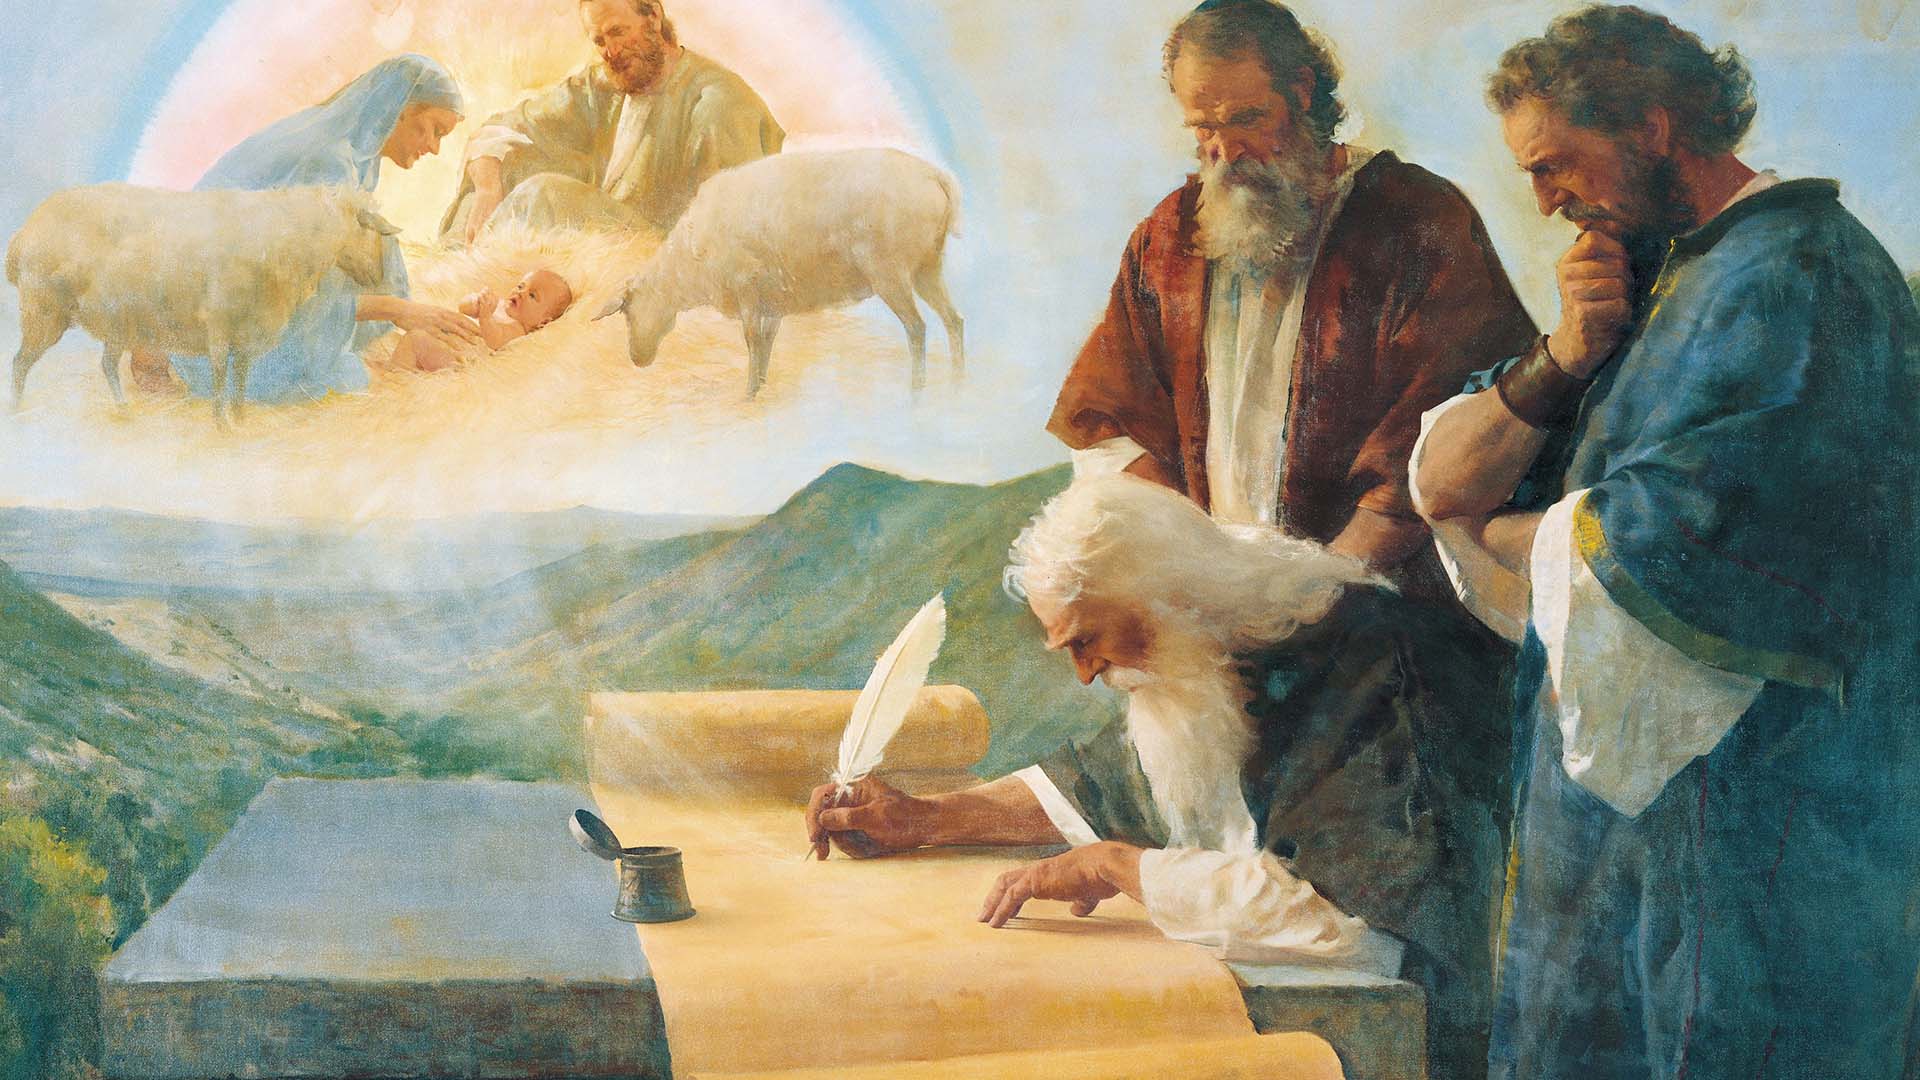 The Prophet Isaiah Foretells Christ’s Birth, by Harry Anderson. Image via Church of Jesus Christ.